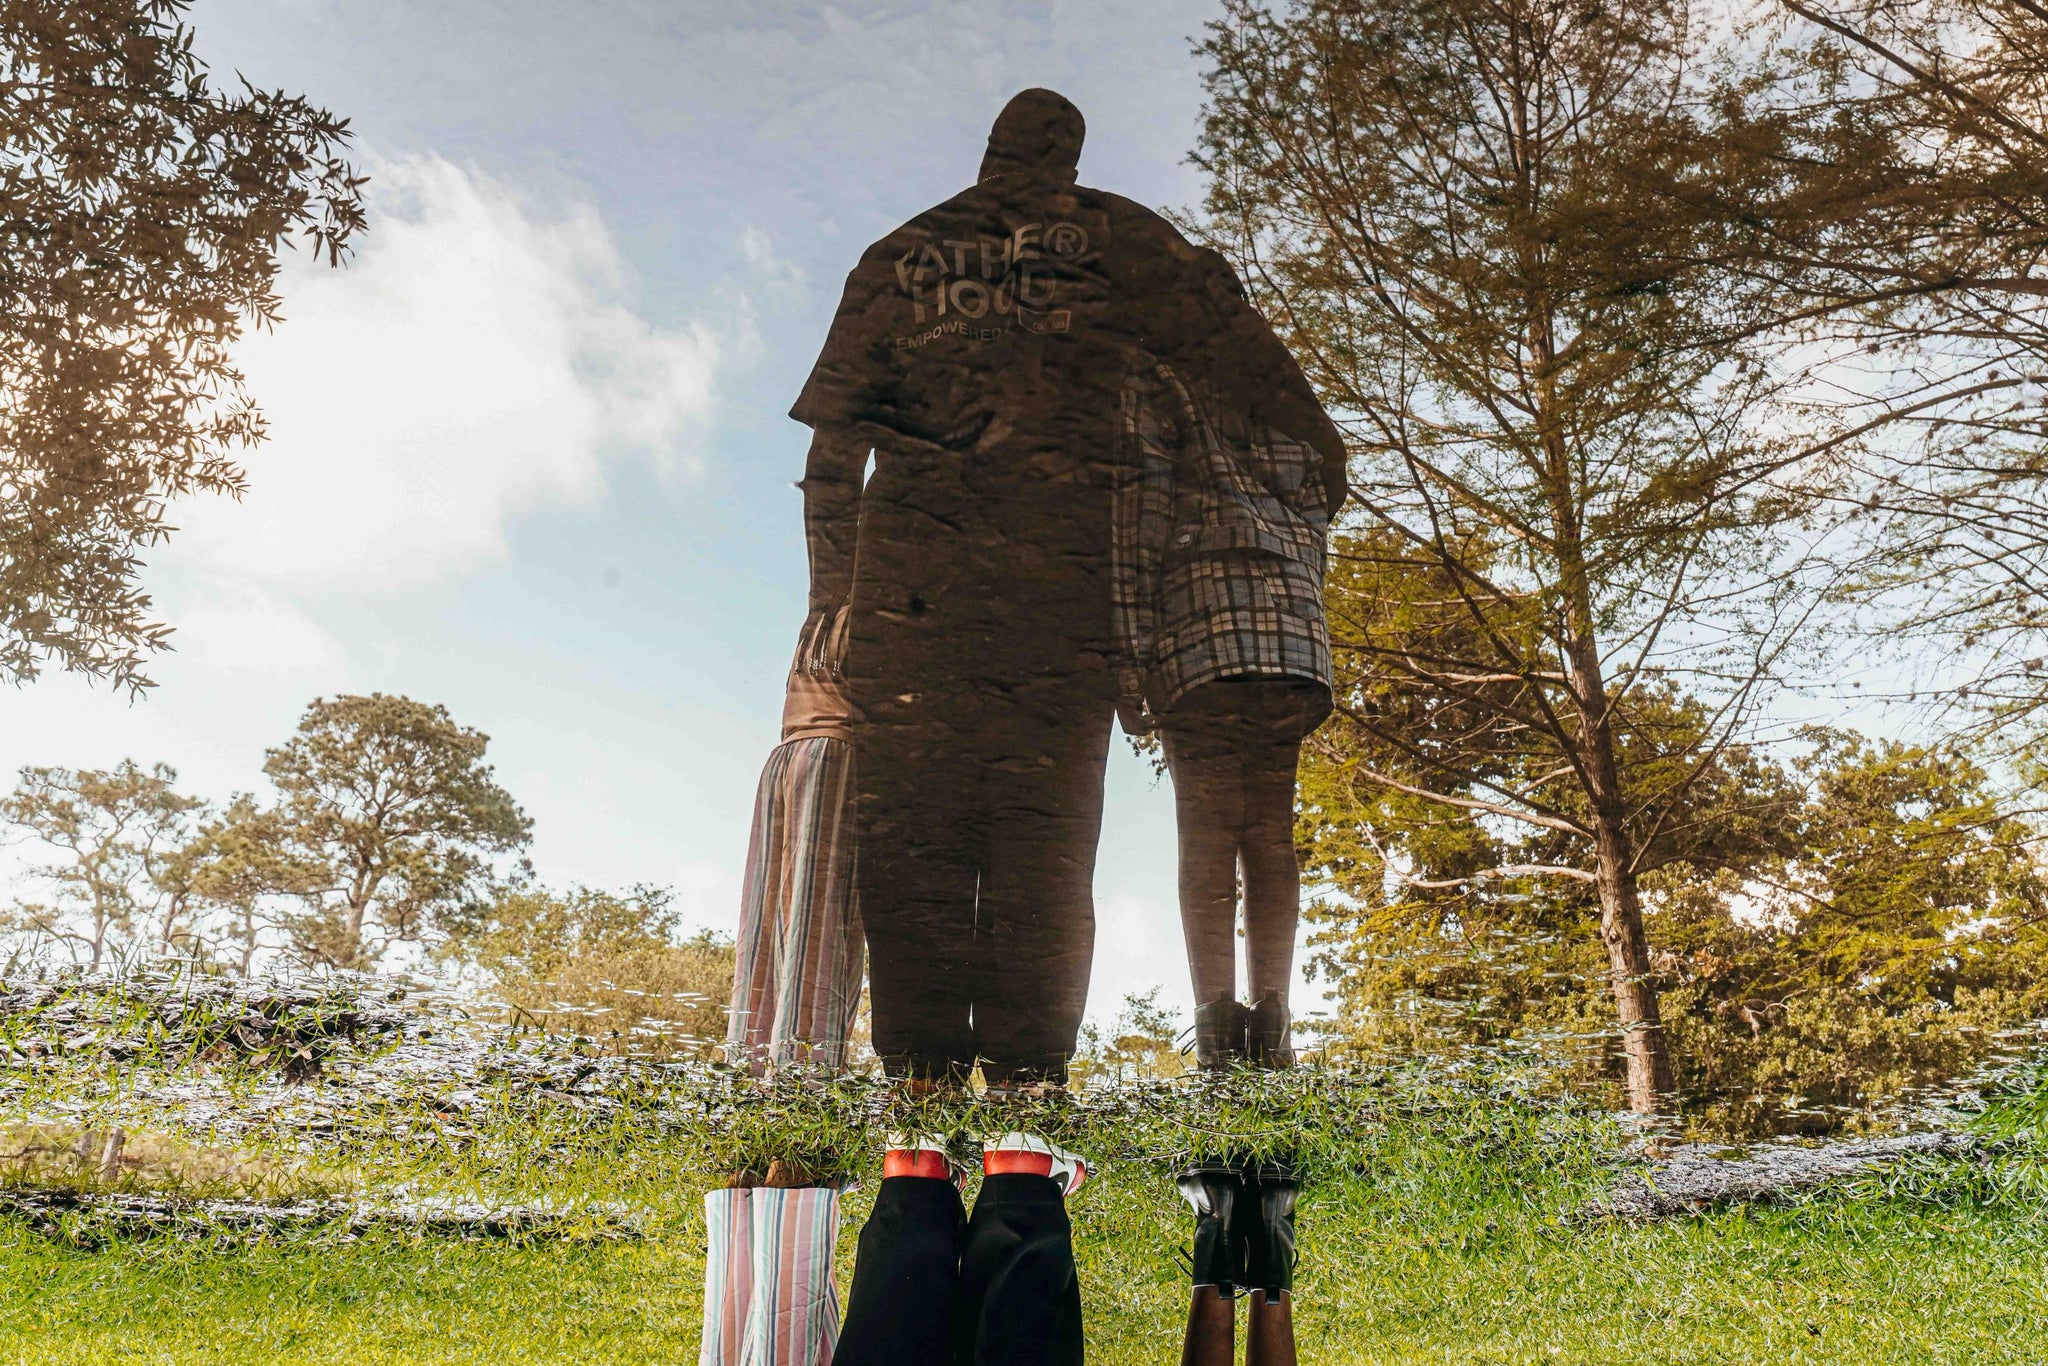 The reflection of Fred and his two daughters in a body of water. In the reflection, the family has their backs facing us. Fred has his arms around his daughters. at the bottom of the image, the family's real feet meet their reflections. Fred is wearing red and white Nikes and his daughters wear combat boots. 